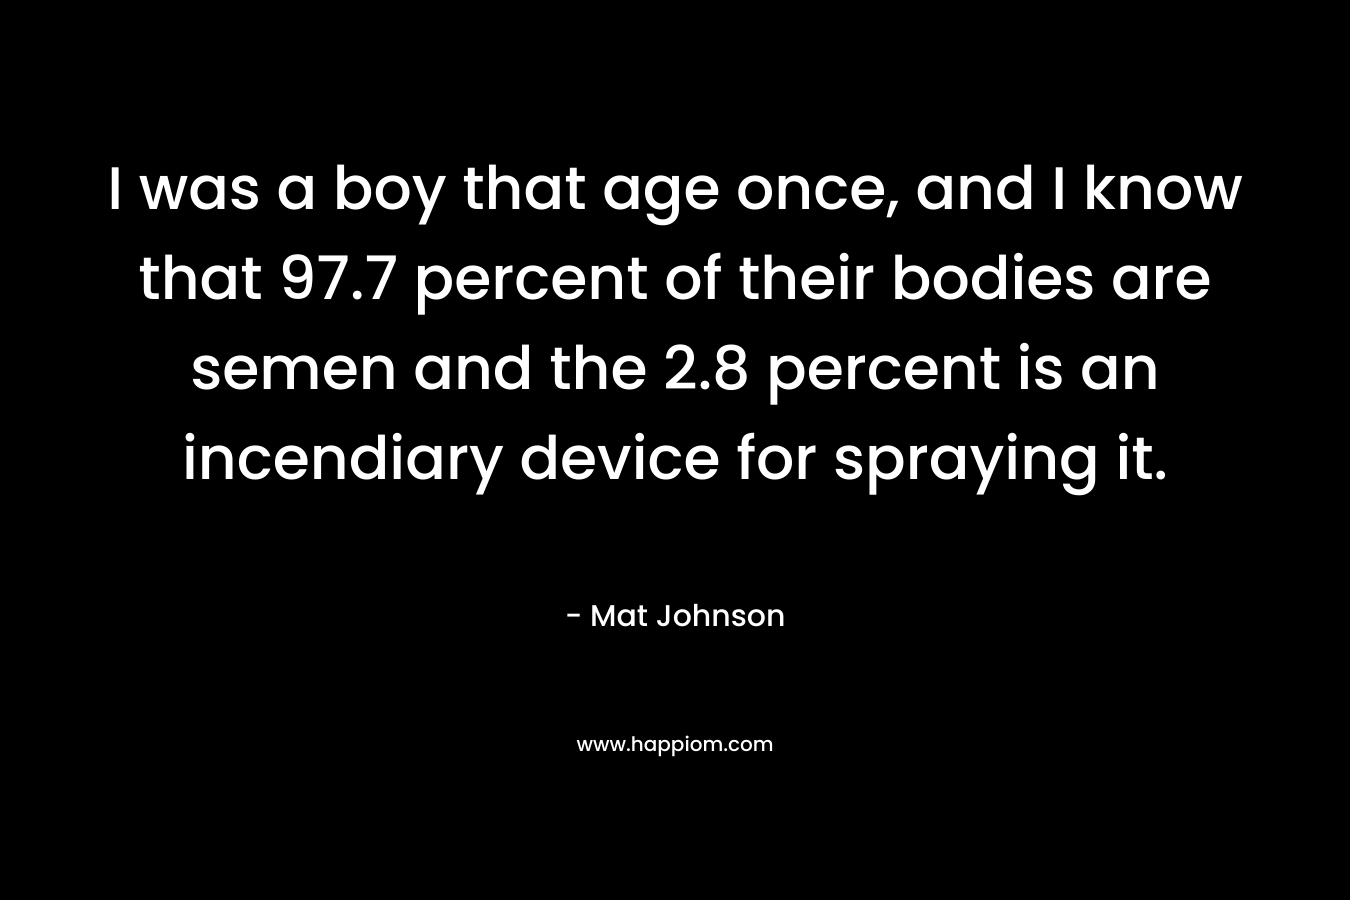 I was a boy that age once, and I know that 97.7 percent of their bodies are semen and the 2.8 percent is an incendiary device for spraying it.